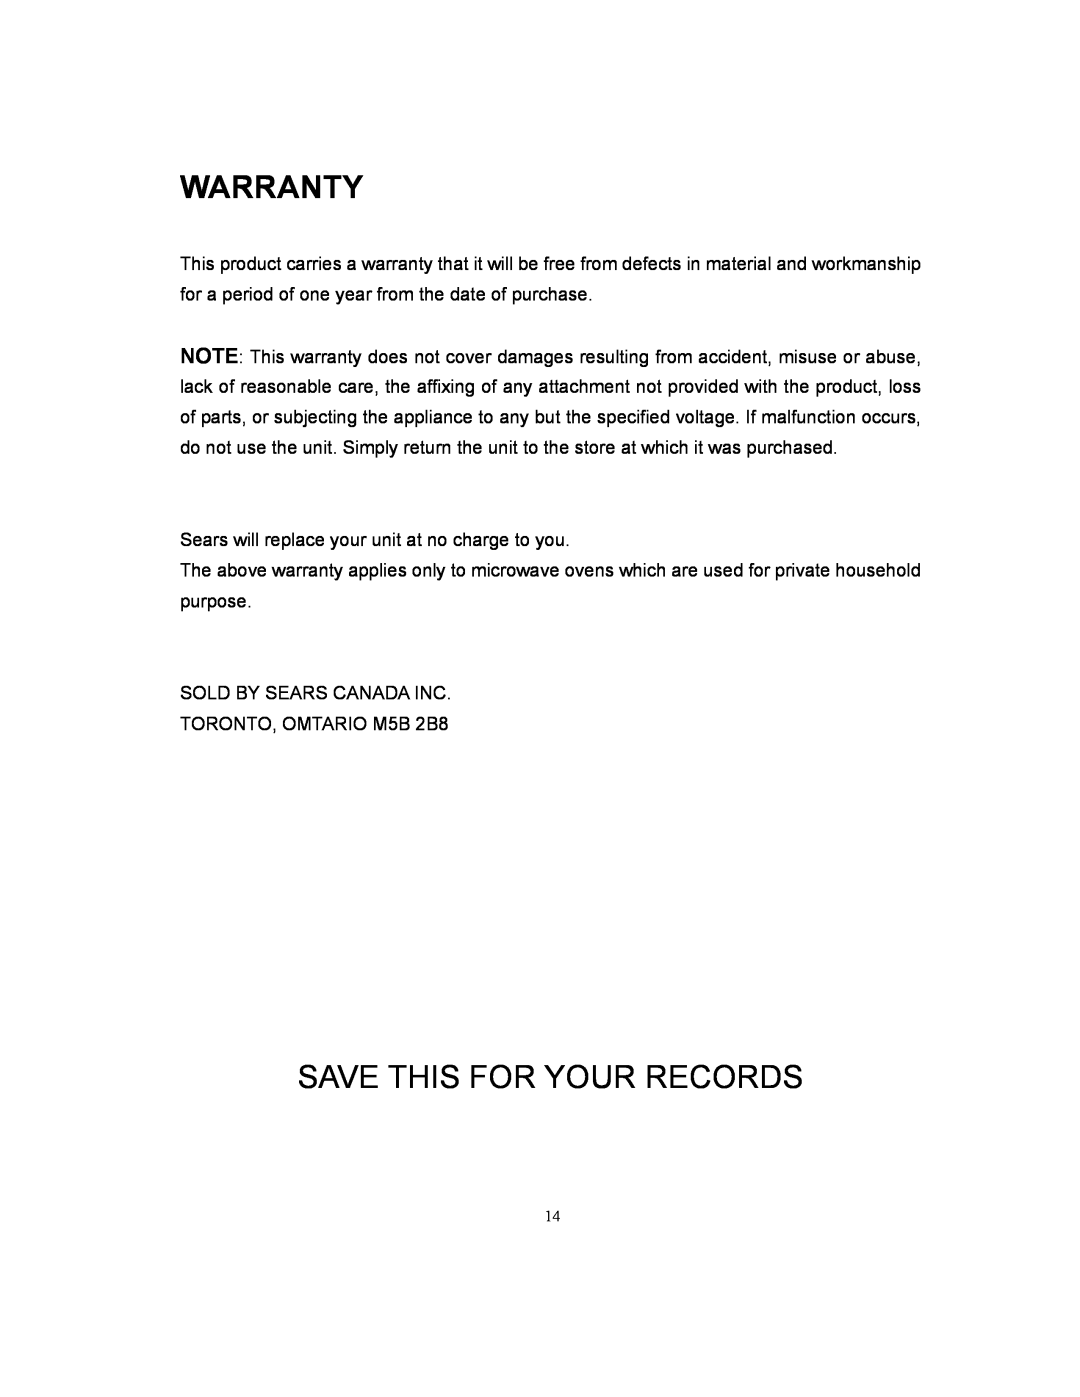 Kenmore 87039 owner manual Save This For Your Records, Warranty 